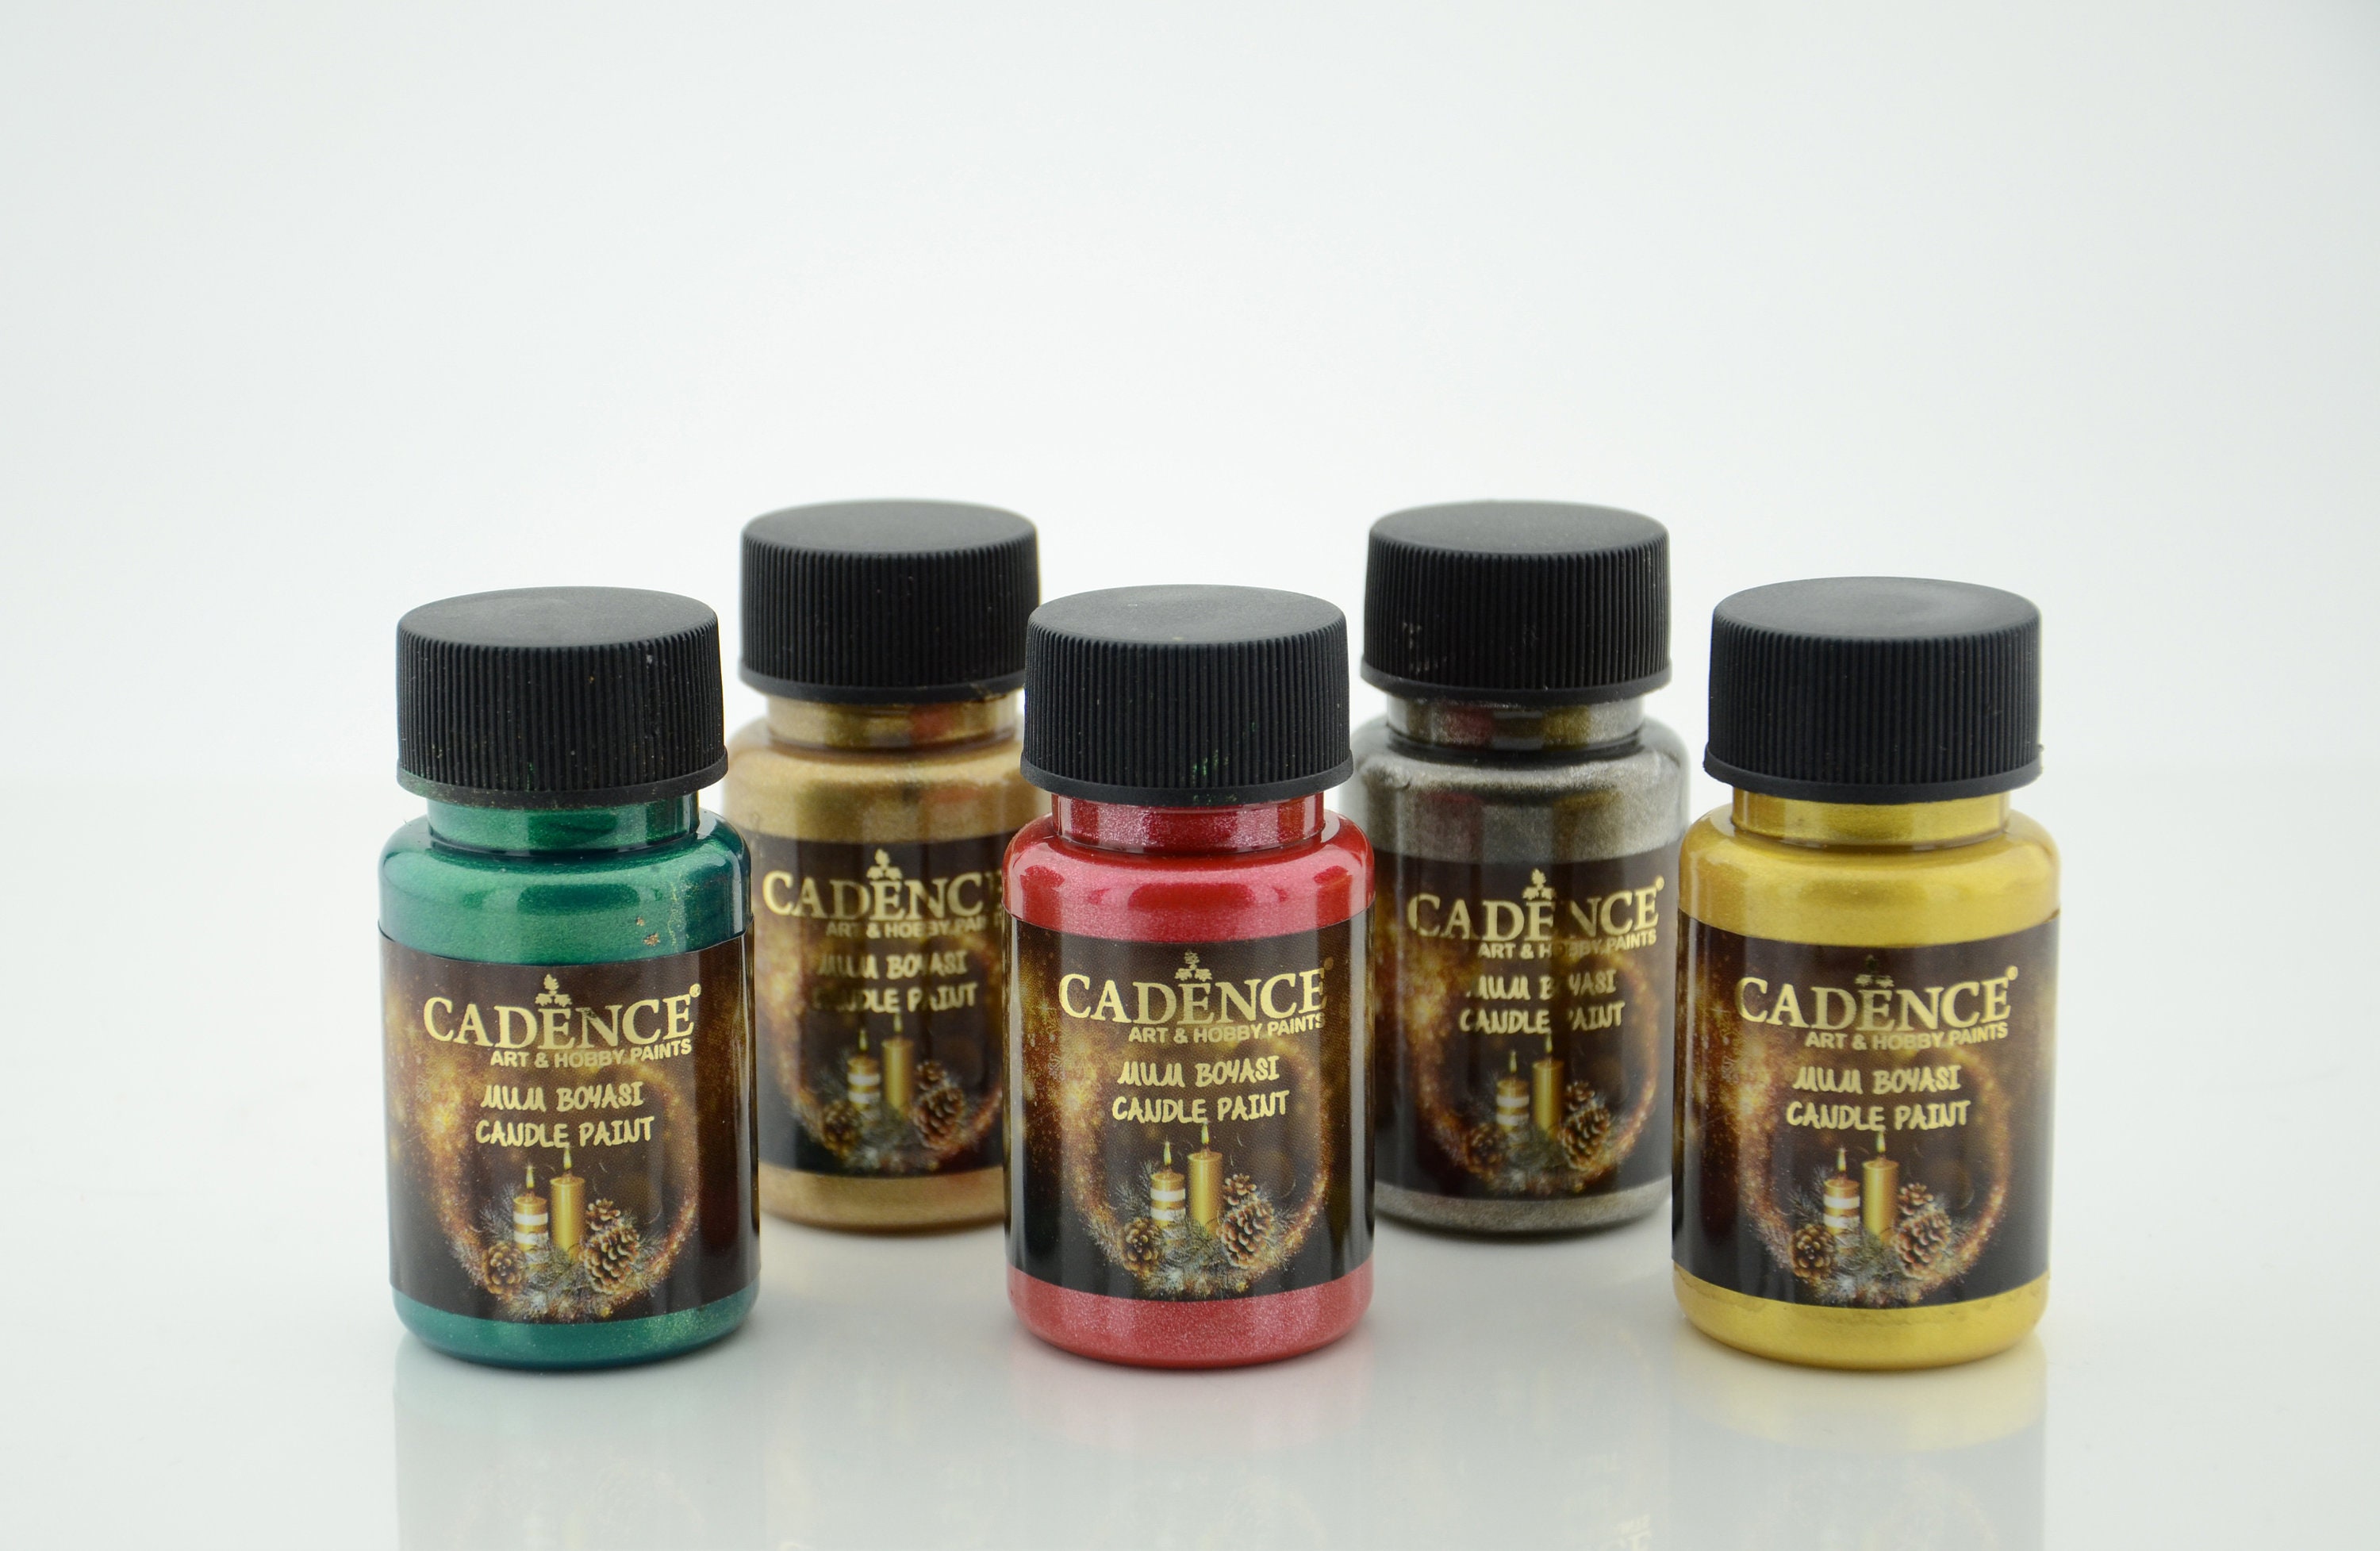 CADENCE candle paint 50 ml. - RICH GOLD 2136  Buy online fast and easy ☛【  】